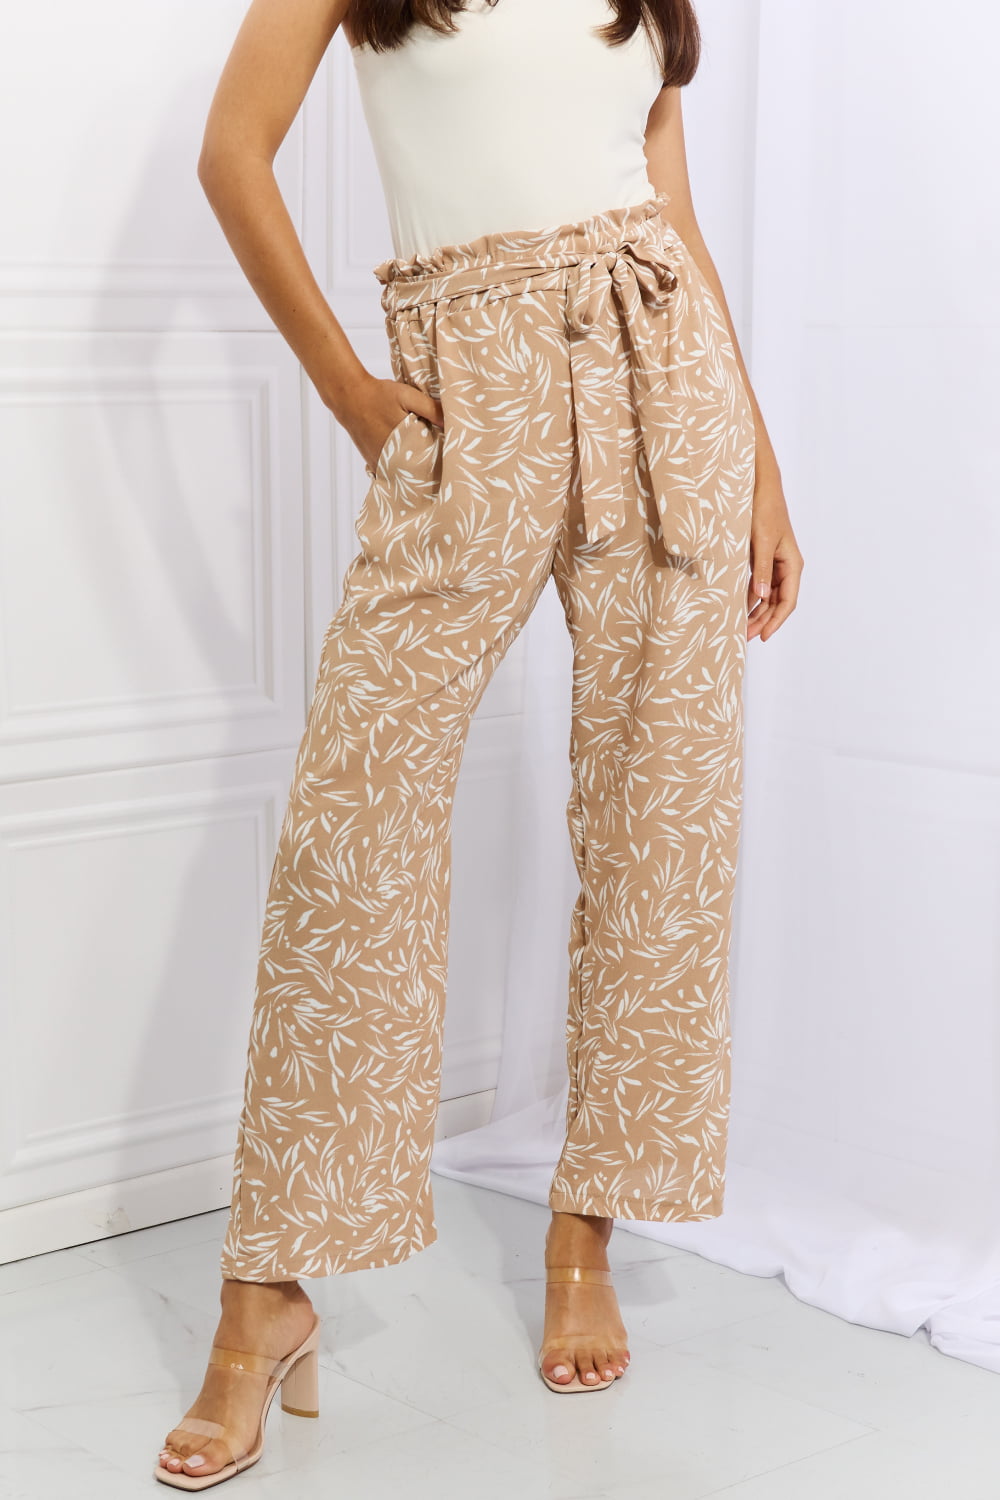 Heimish Right Angle Full Size Geometric Printed Pants in Tan free shipping -Oh Em Gee Boutique